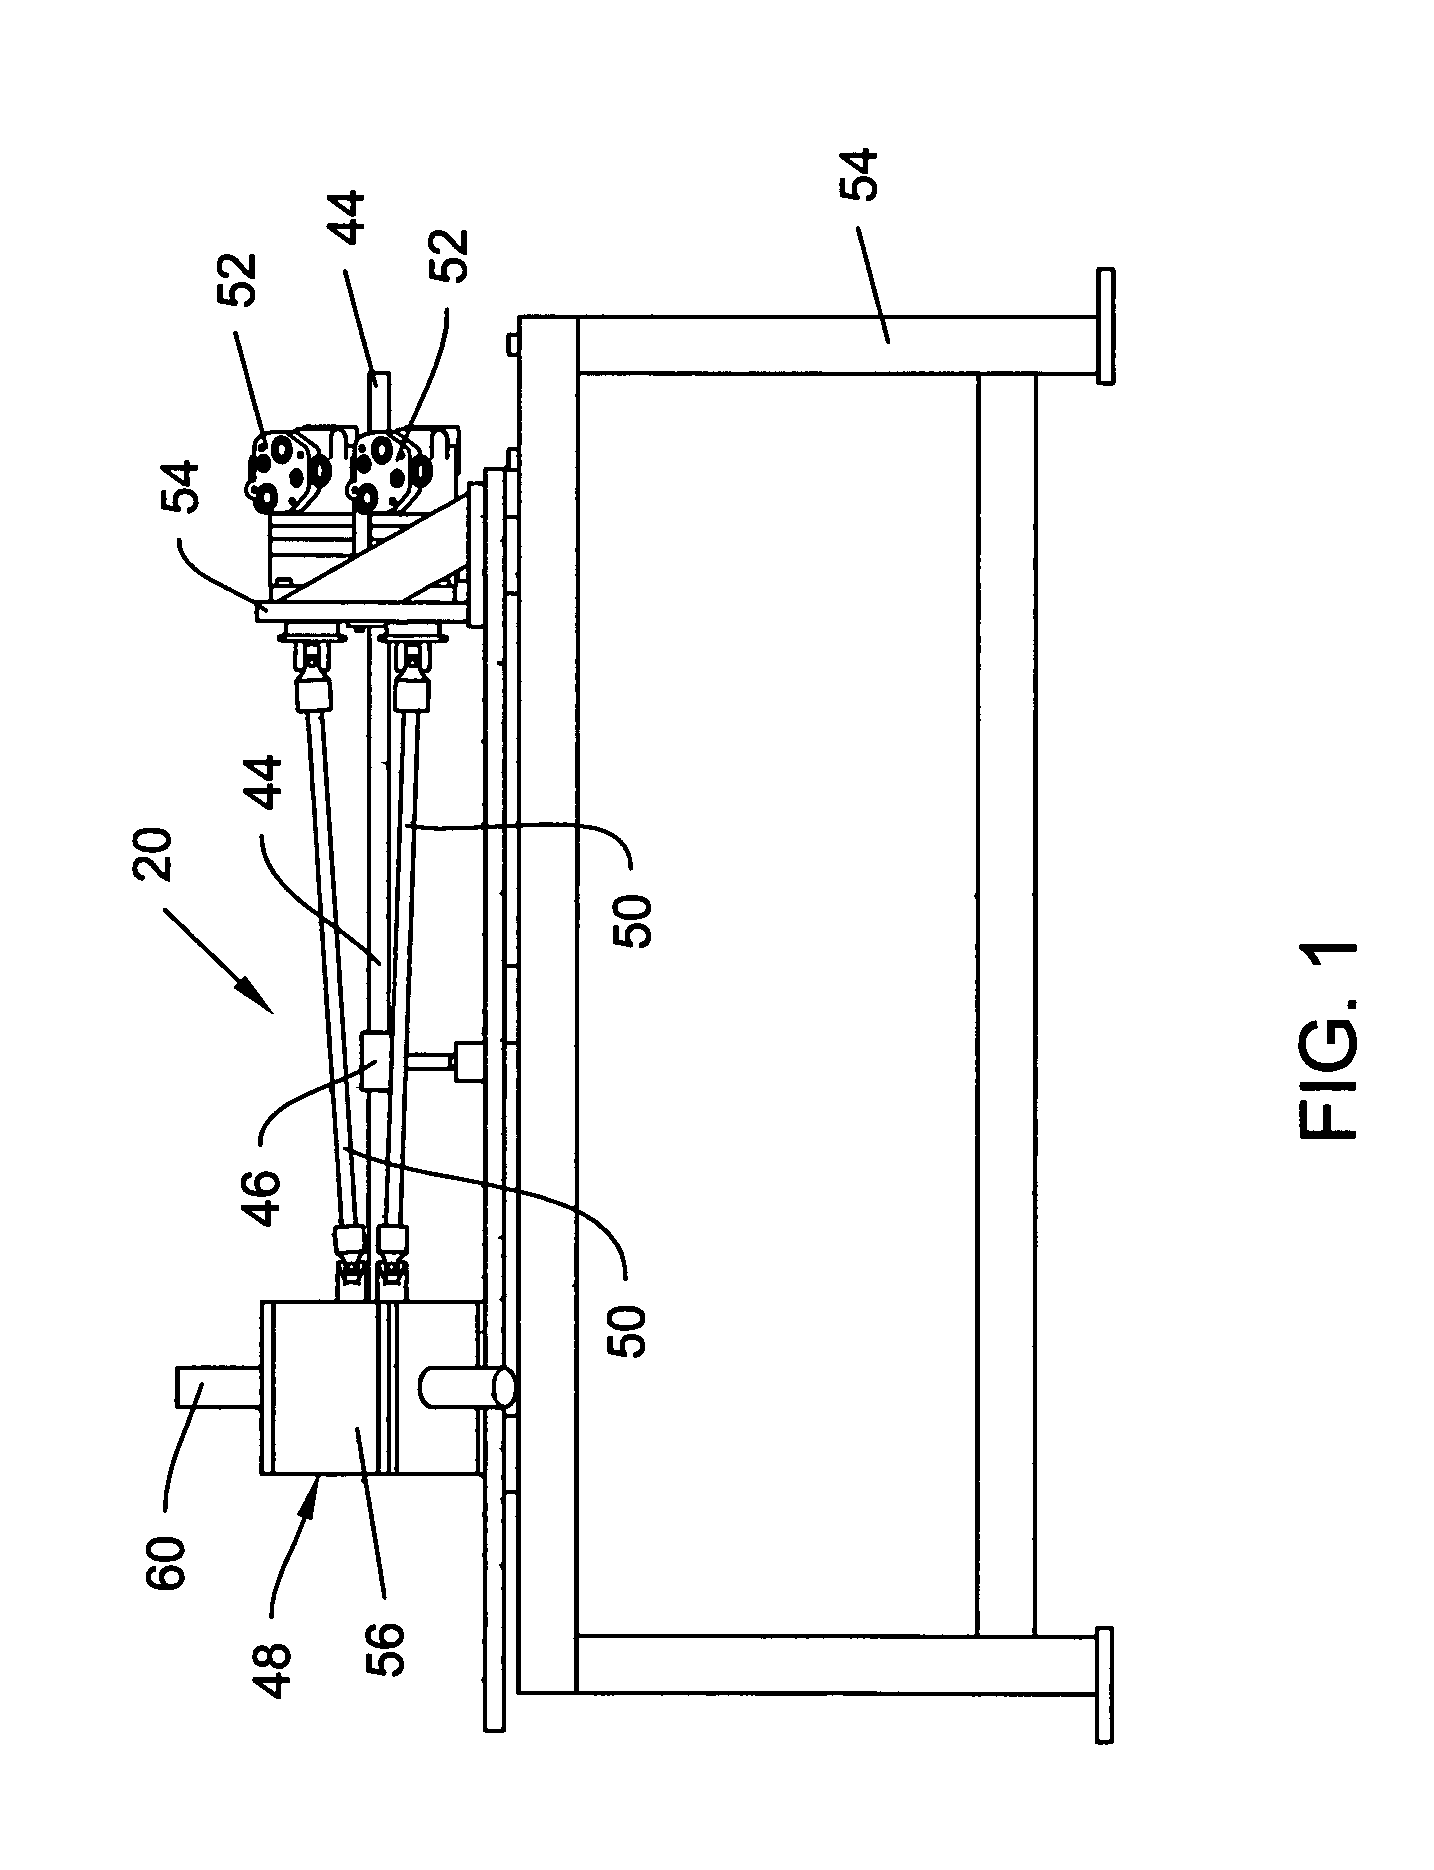 Apparatus and methods for forming internally and externally textured tubing